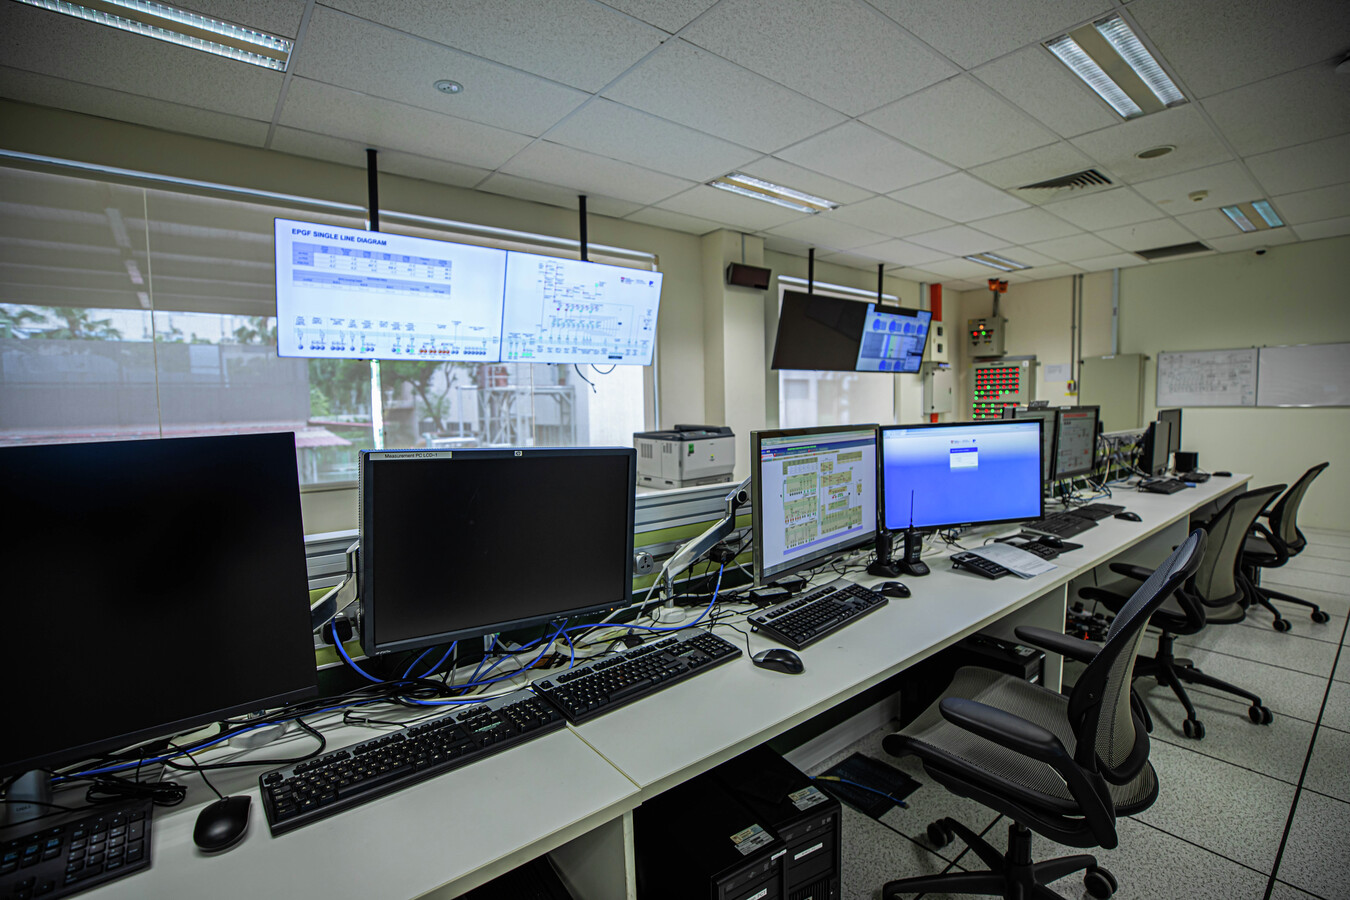 The nucelus of the centre is the control room, which is equipped with automation and intelligence technologies.